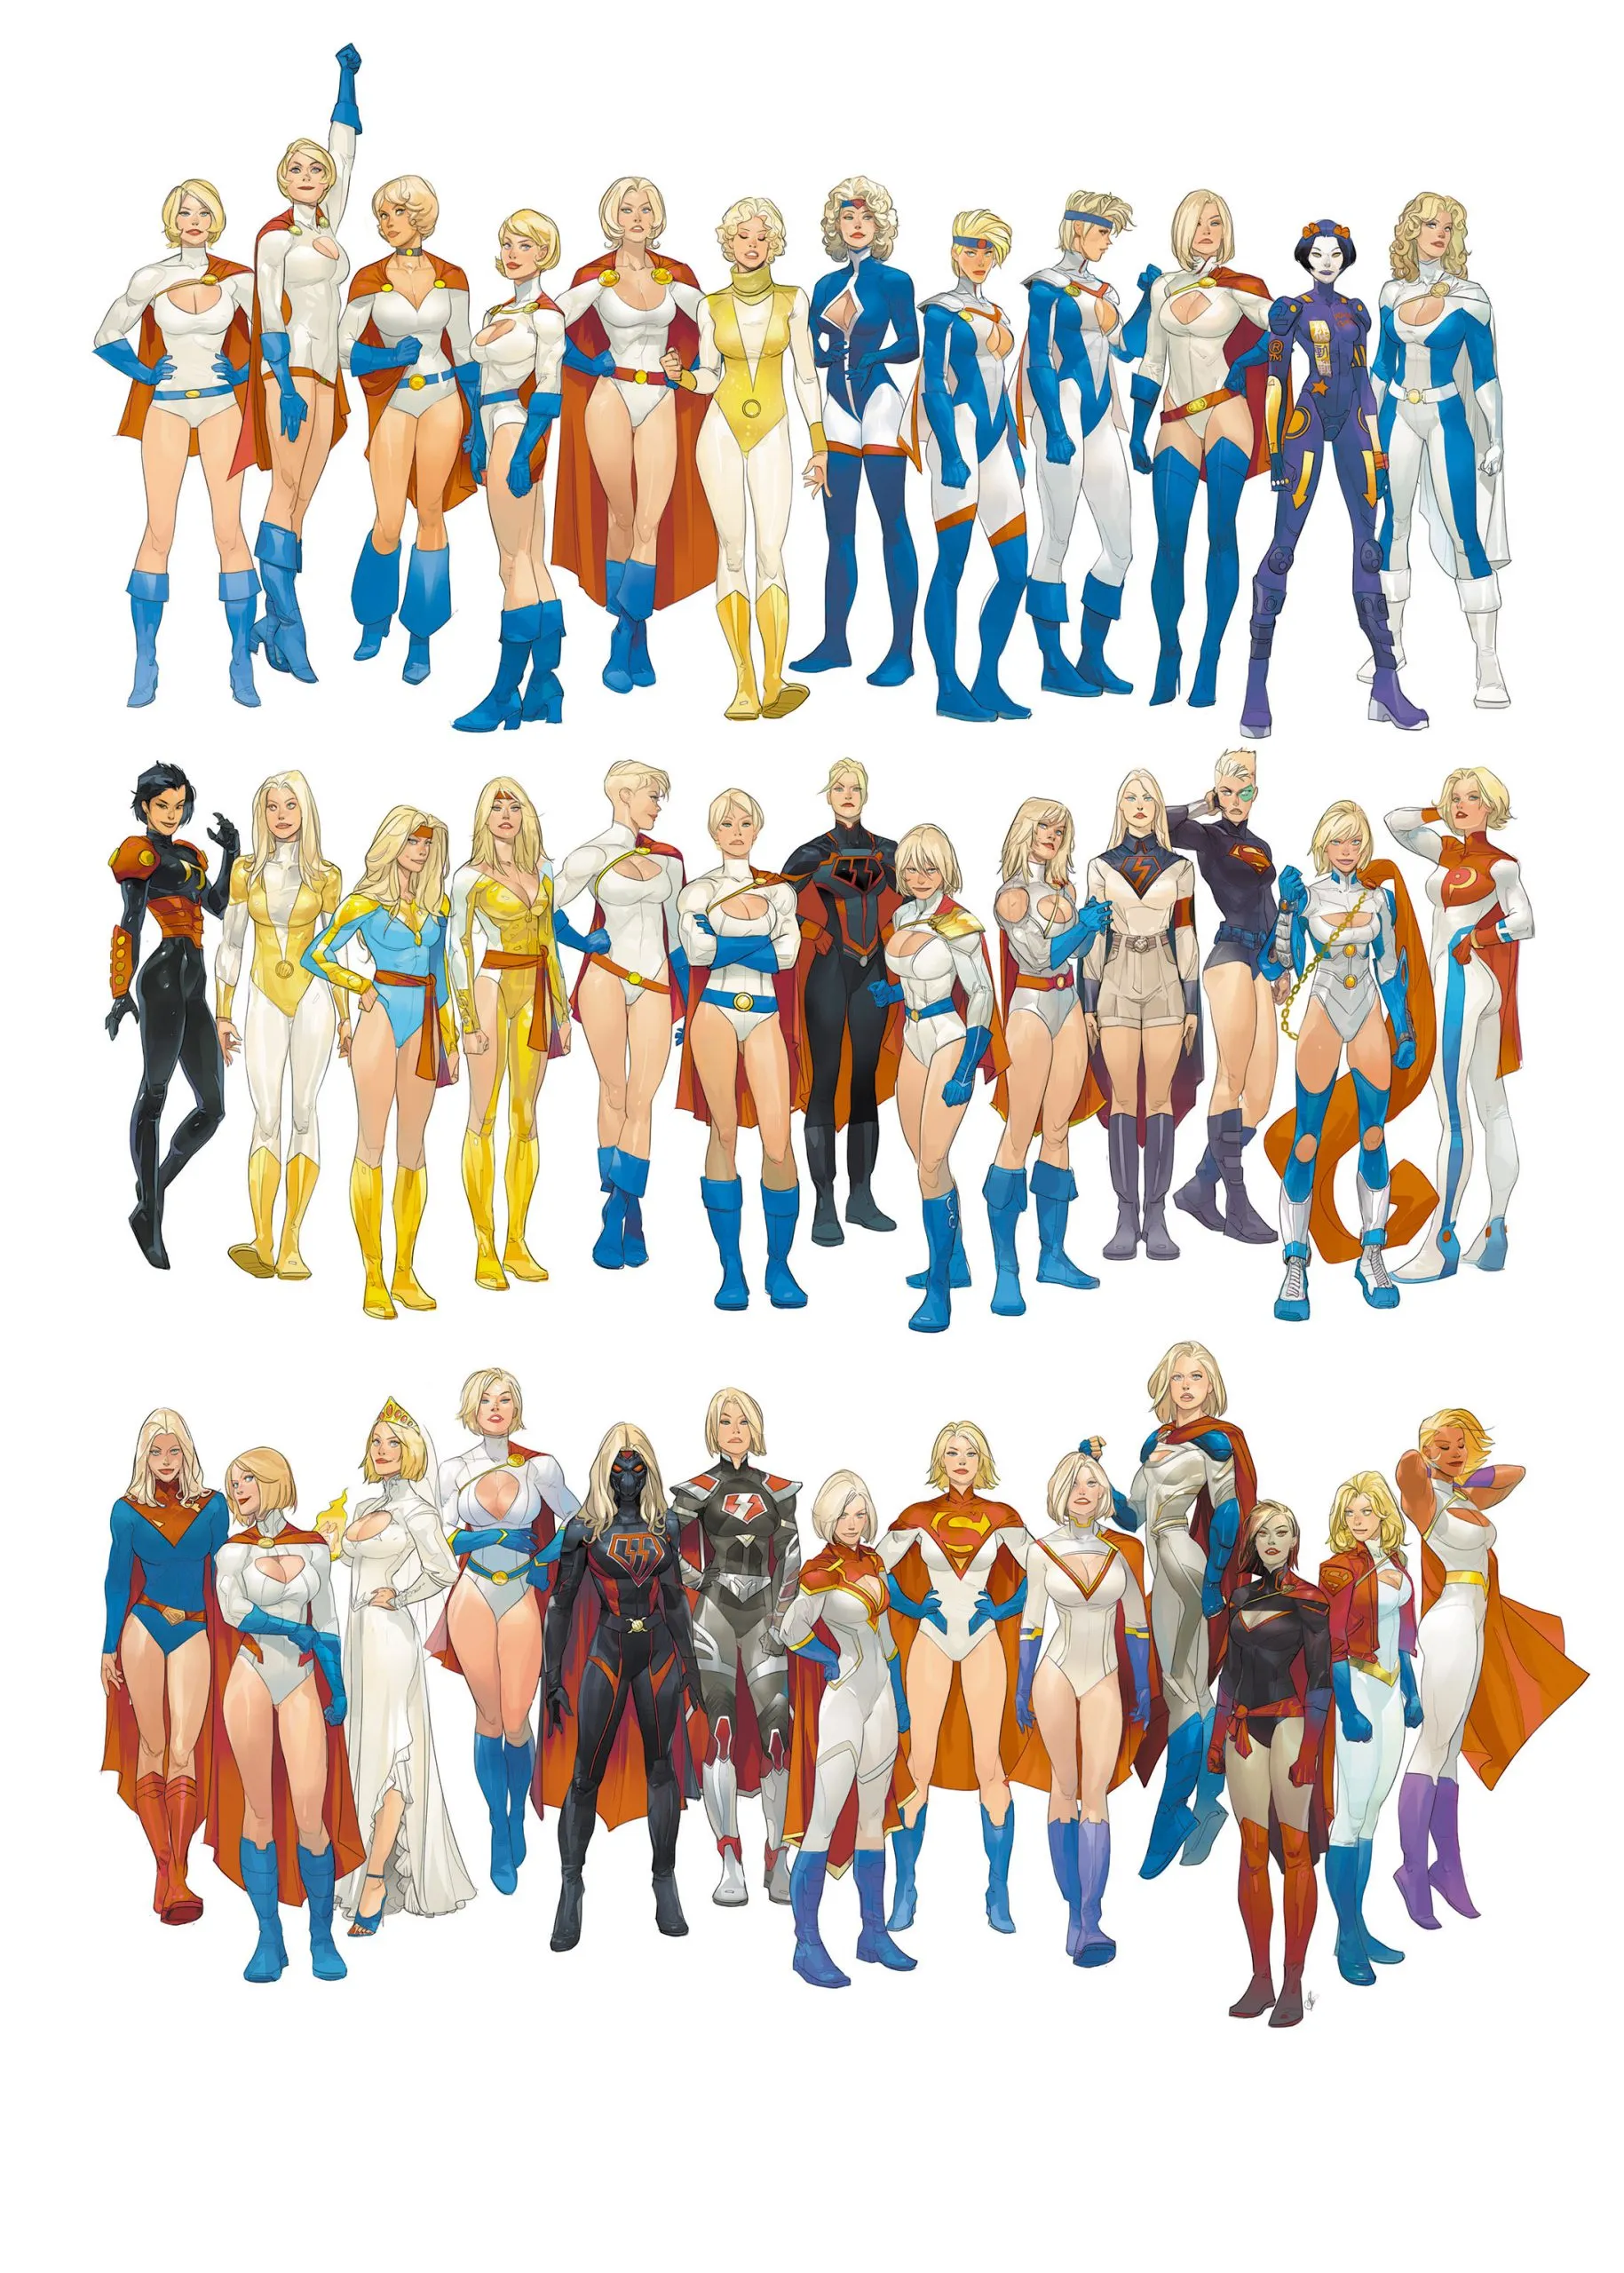 Power Girl #1 C SCHMIDT with Power Girls through the Ages Supergirl